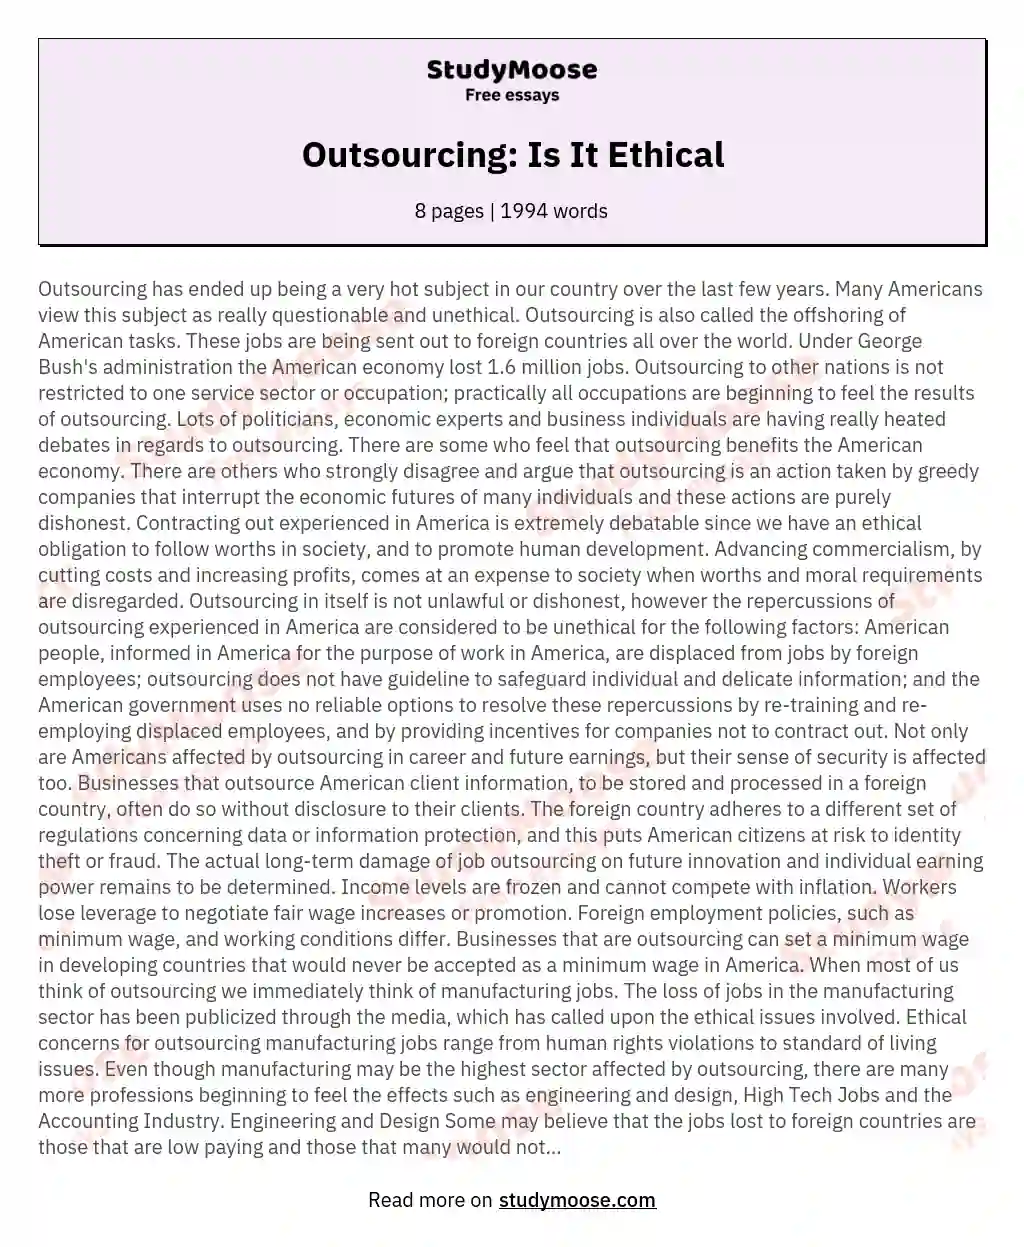 Outsourcing: Is It Ethical essay